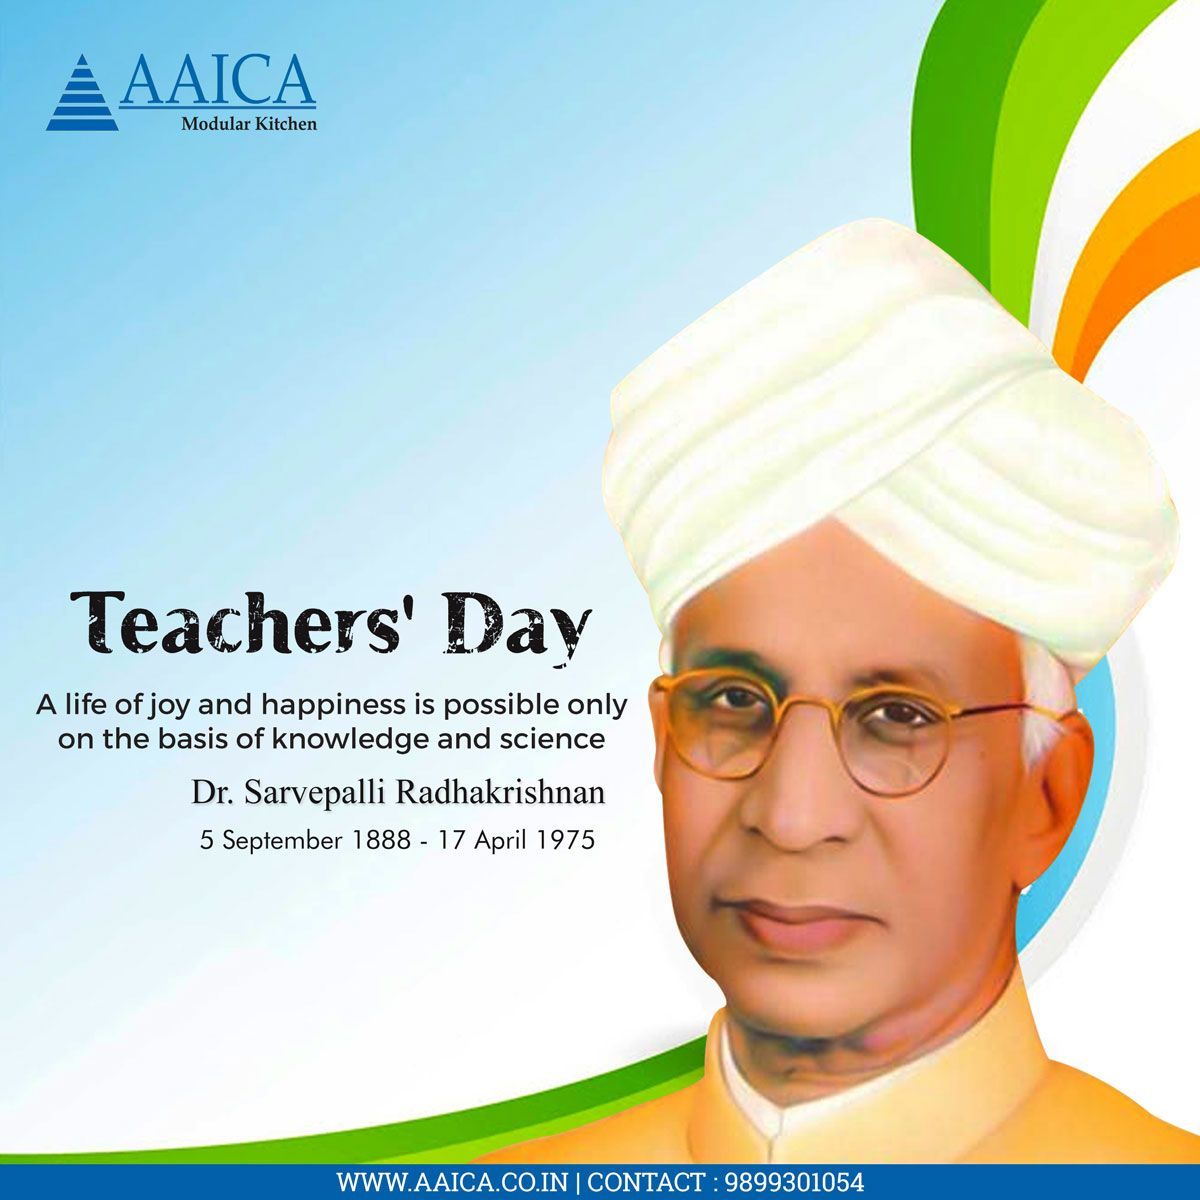 Since 1962 Teachers' Day commemorates the #Birthday of Dr